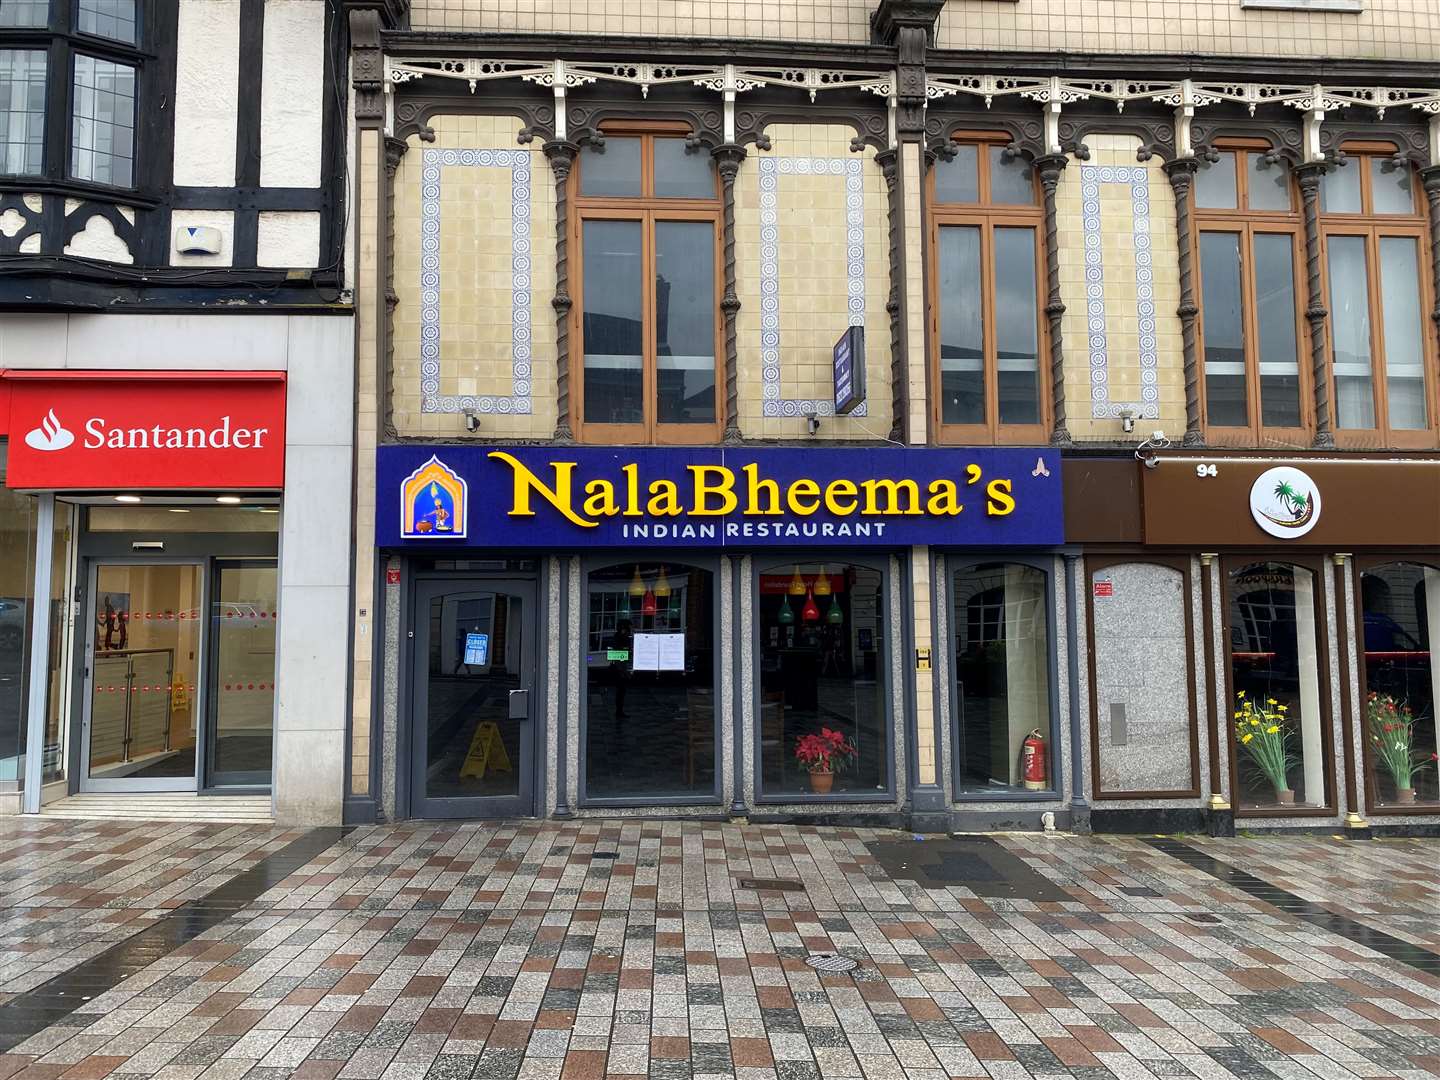 Nala Bheema's in Maidstone High Street is being investigated after a "widespread active cockroach infestation"